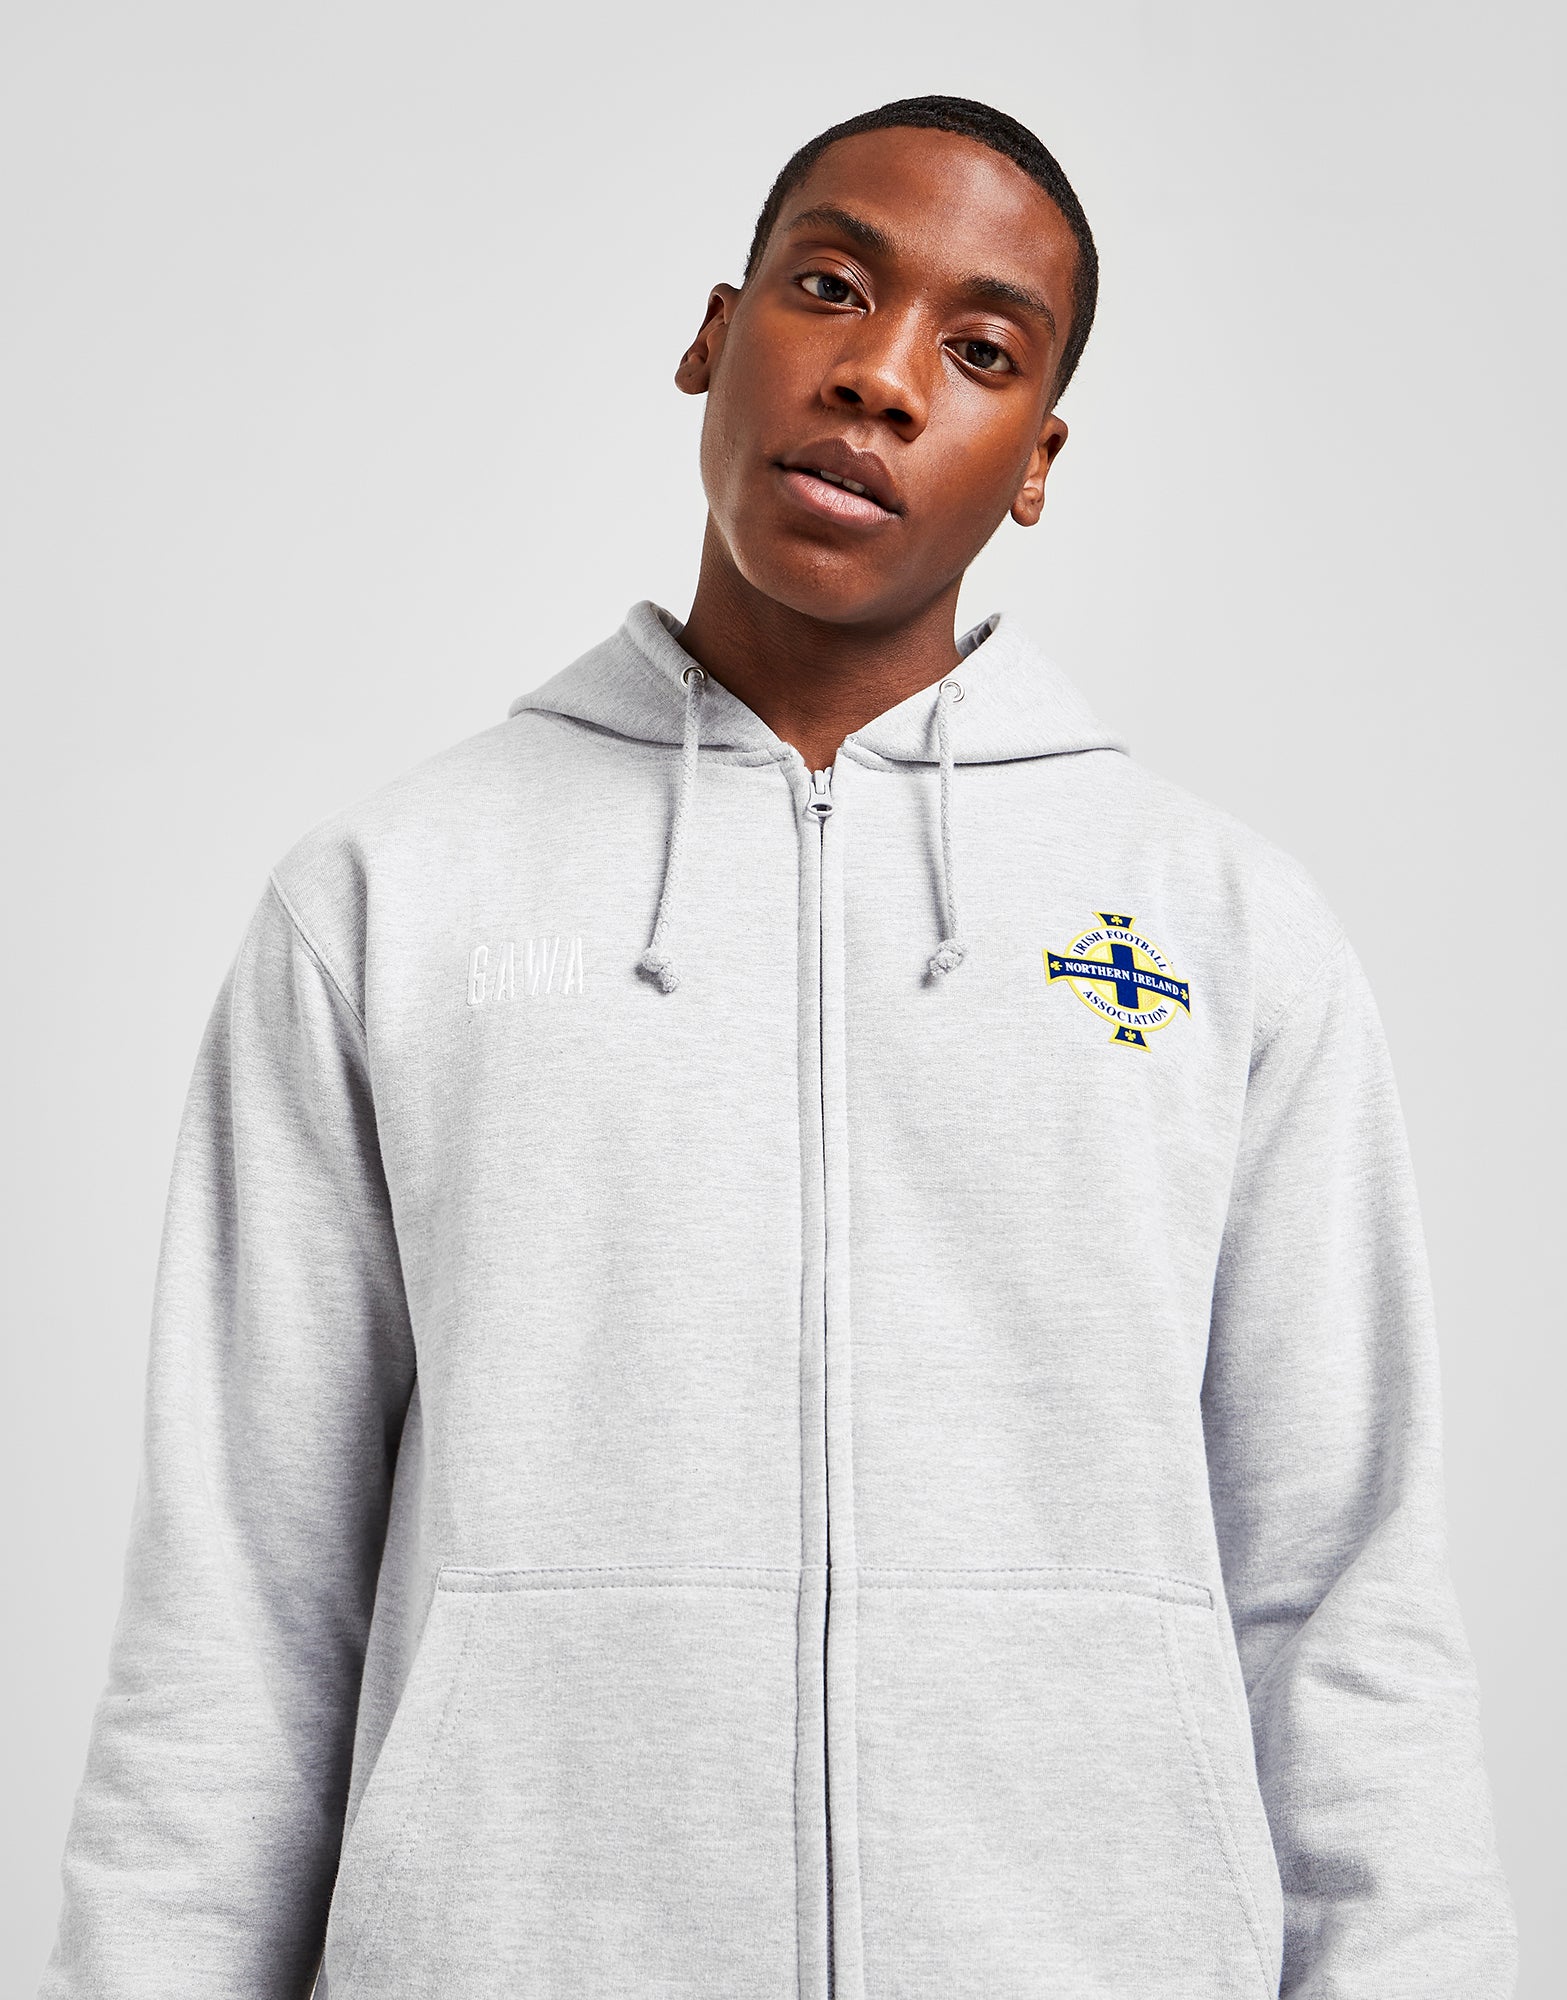 Official Northern Ireland Crest Zip Hoodie - Grey Marl - The World Football Store